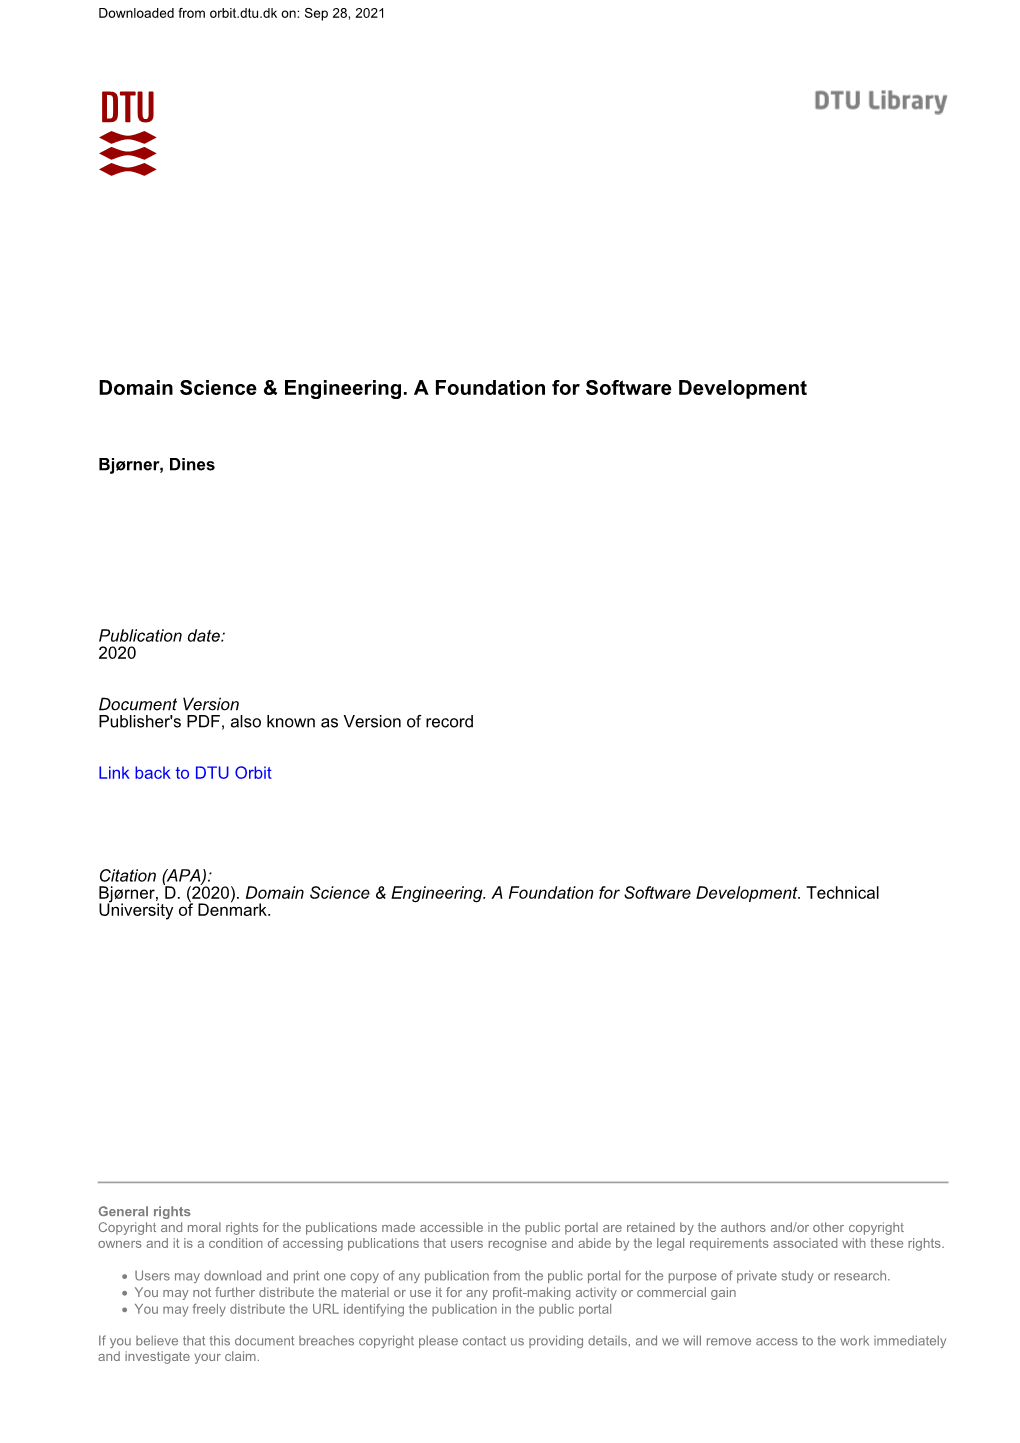 Domain Science & Engineering. a Foundation for Software Development